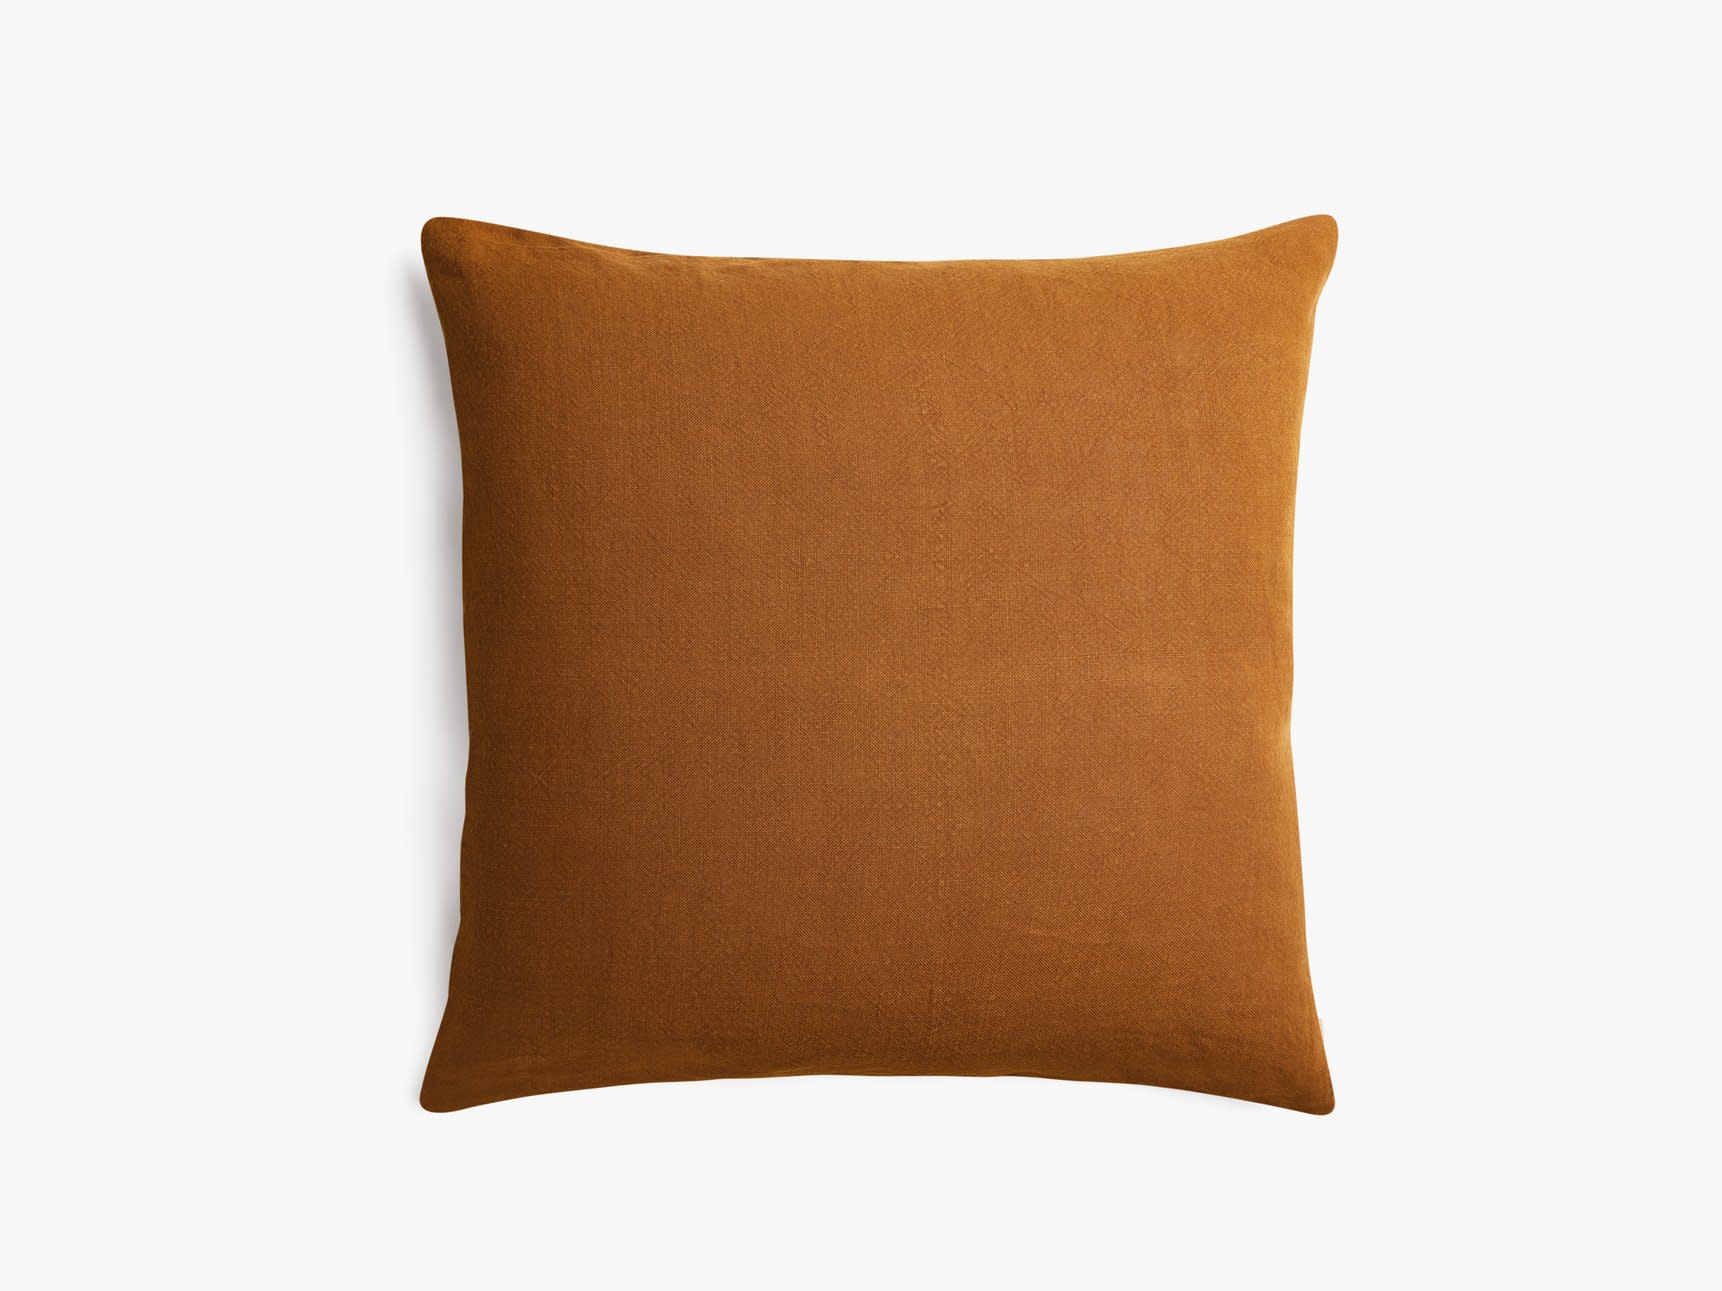 Vintage Linen Euro Pillow Cover Product Image